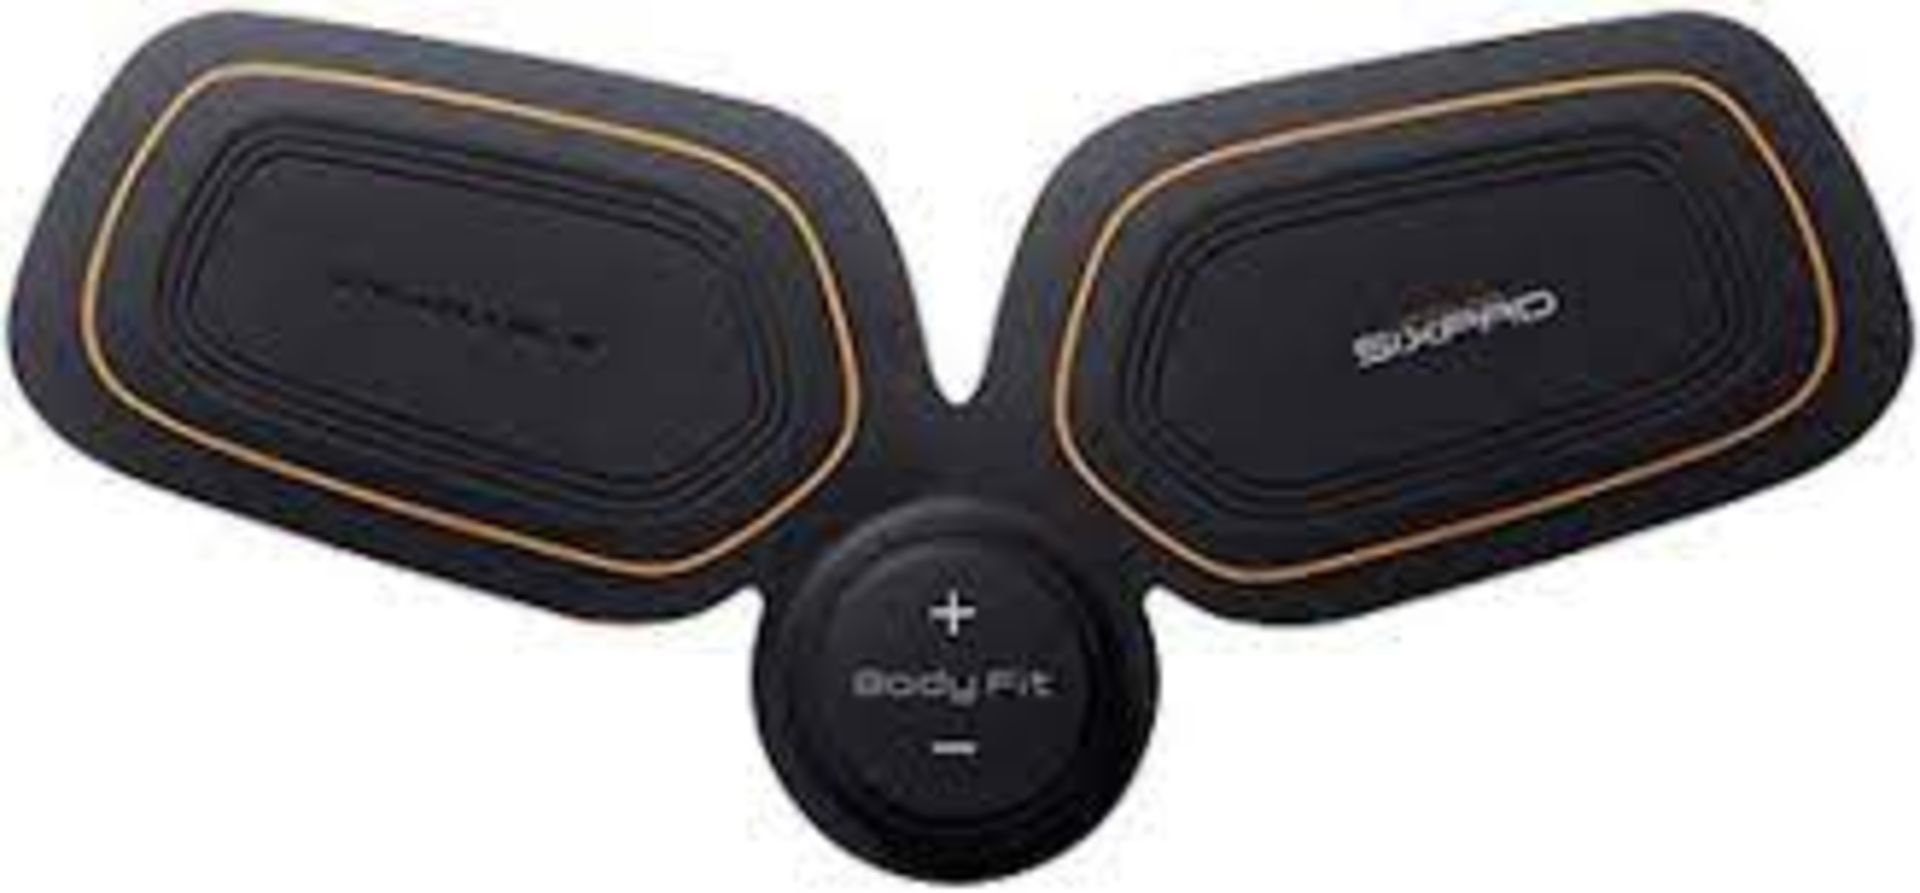 TRADE LOT 10 X NEW BOXED SIXPAD Bodyfit Tone multiple muscle groups. RRP £175 EACH.S1 Effective